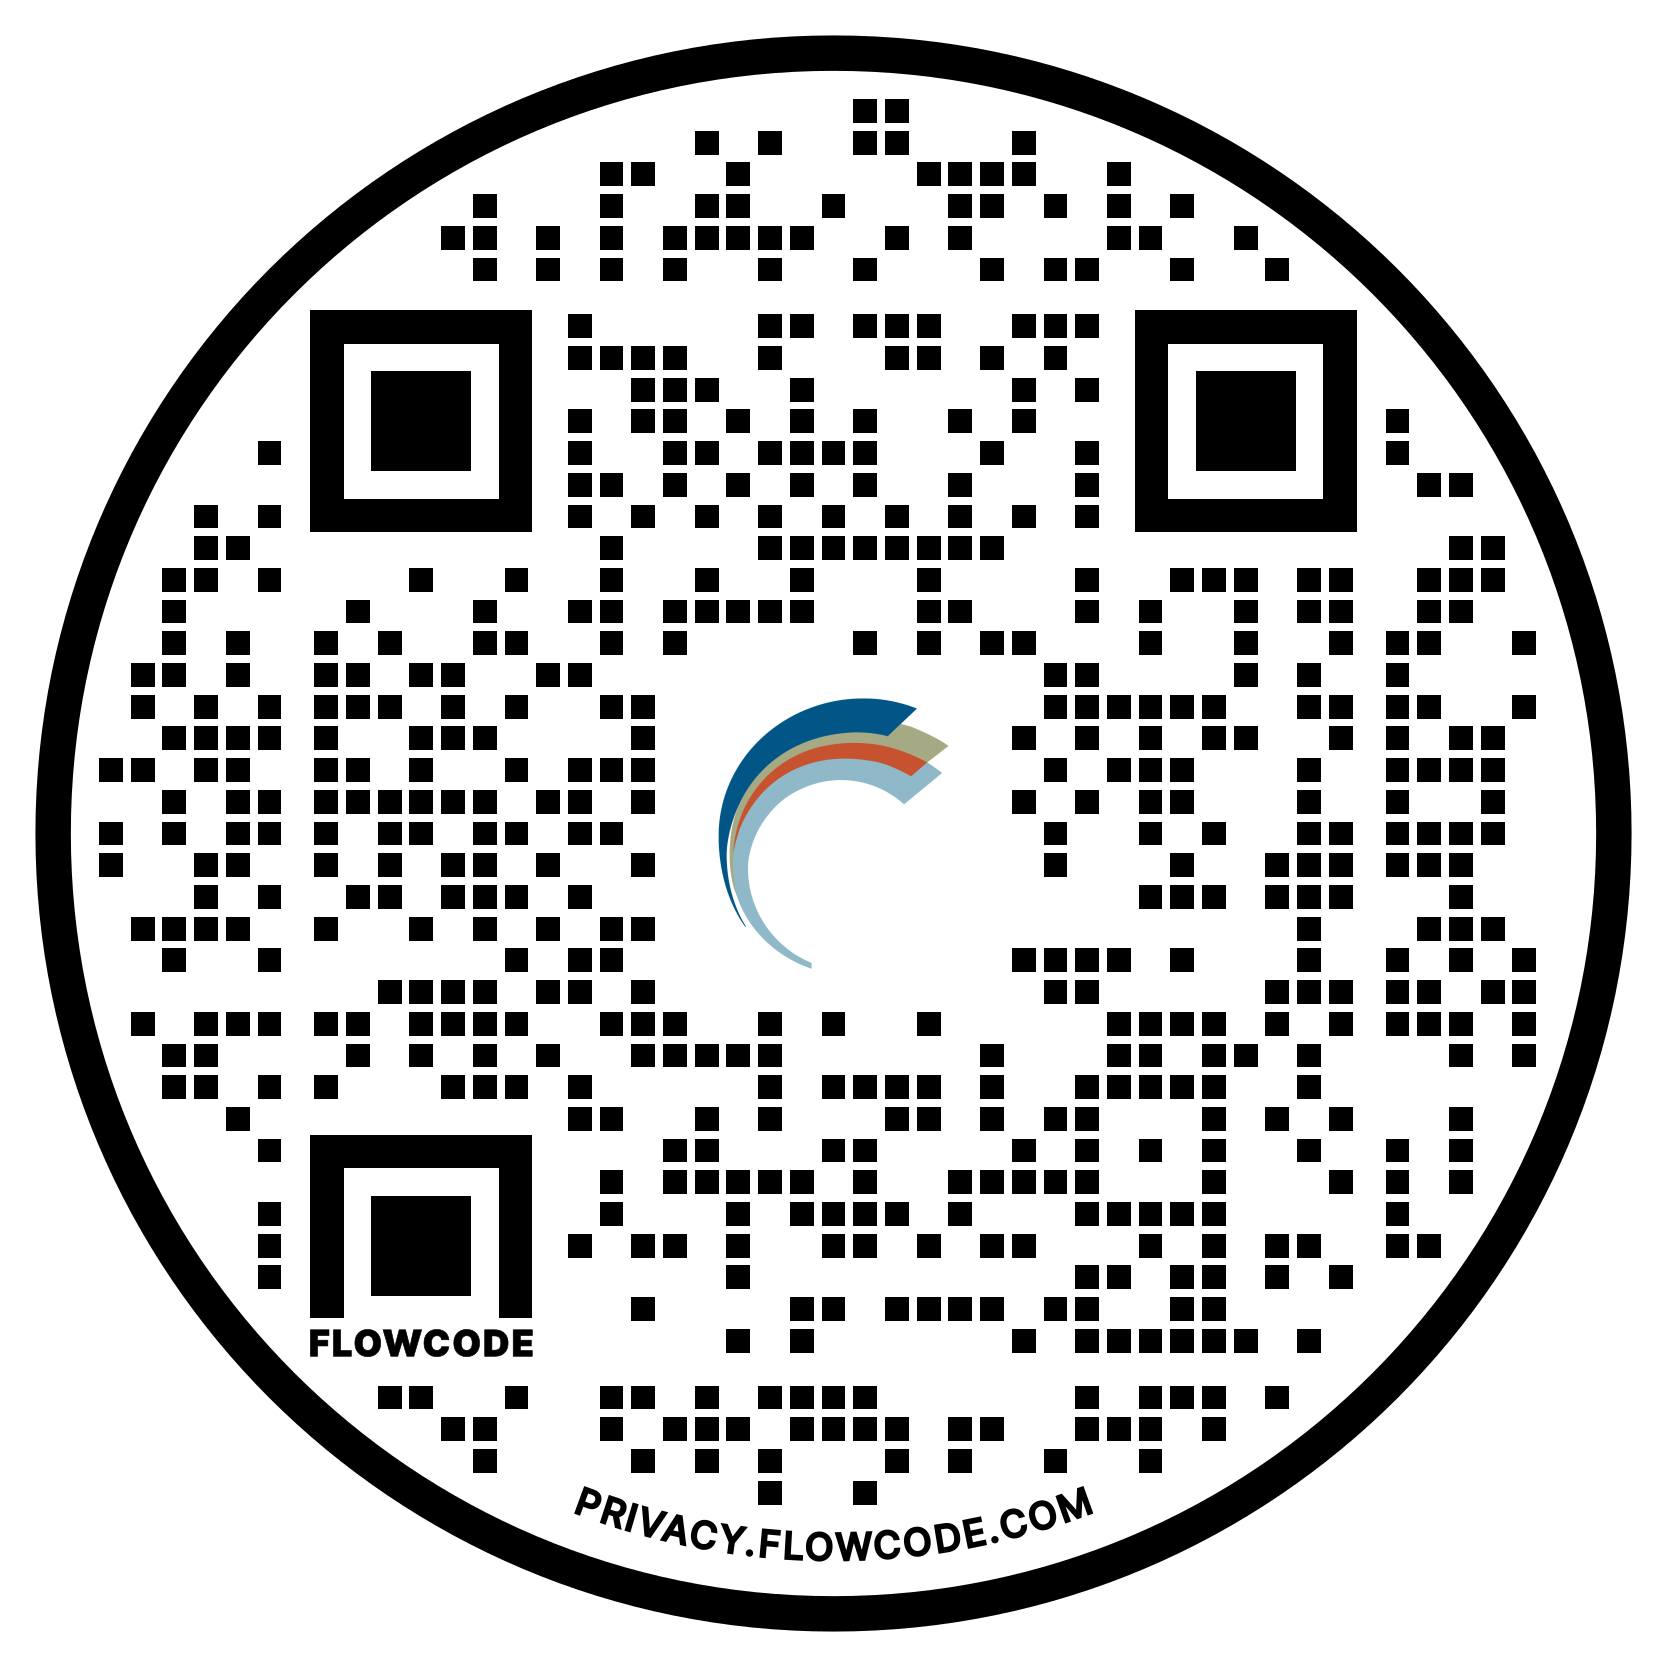 Register Your Phone Number By Scanning This QR Code